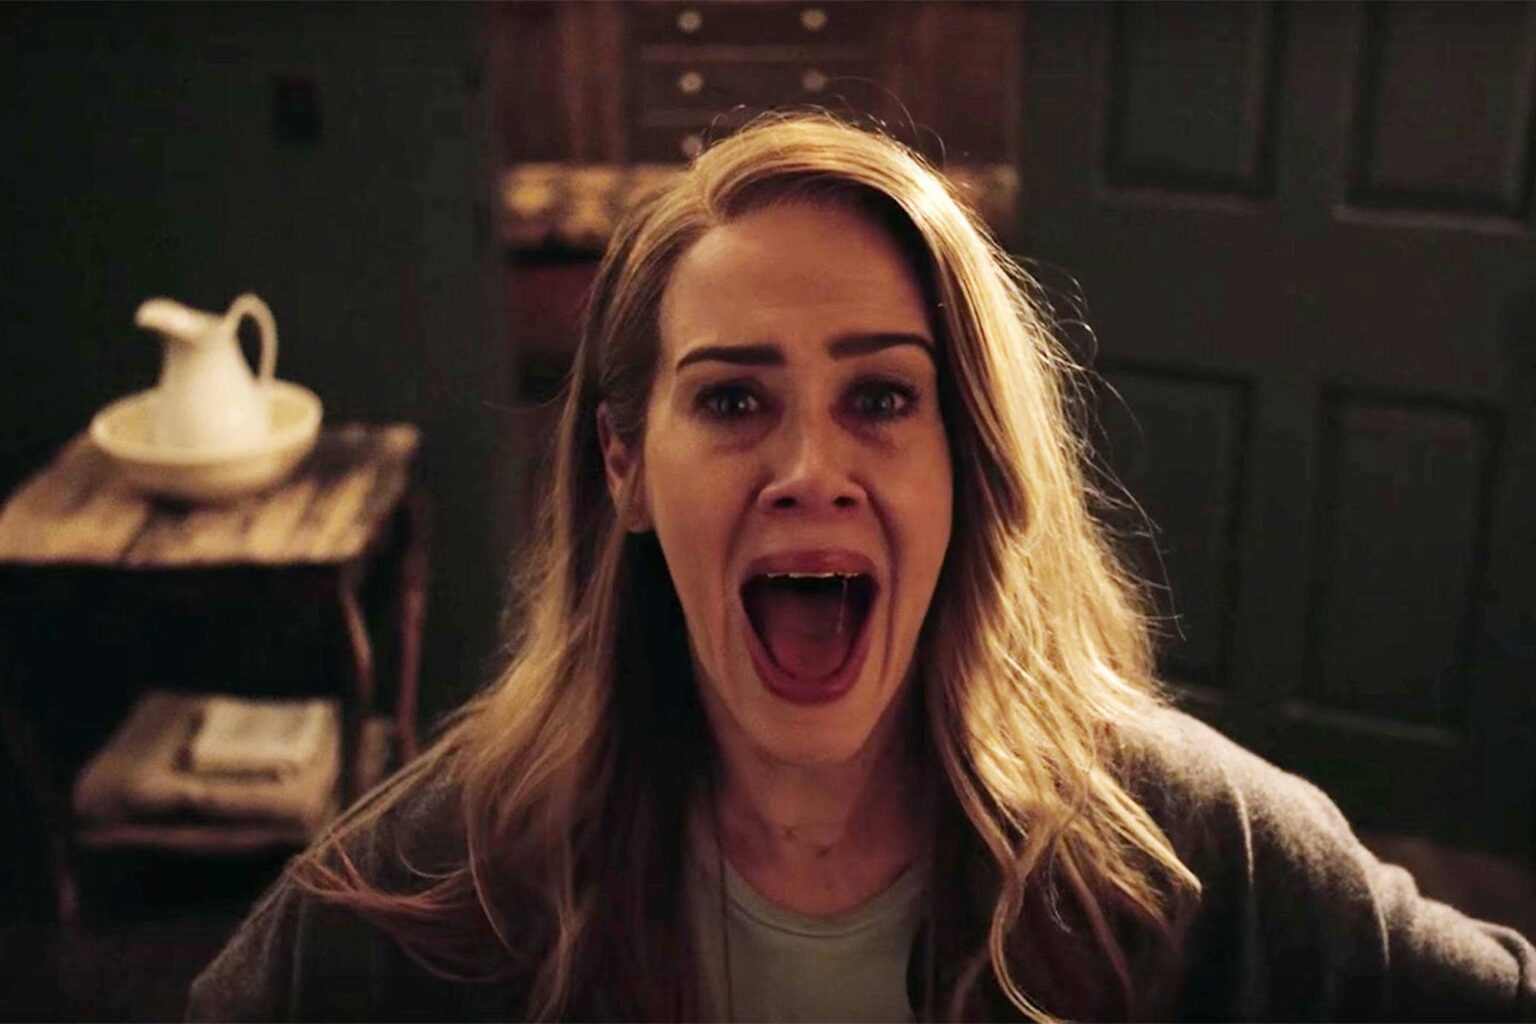 Sarah Paulson shares her own horror story on 'American Horror Story'. Learn what season was a terror for her to get through.